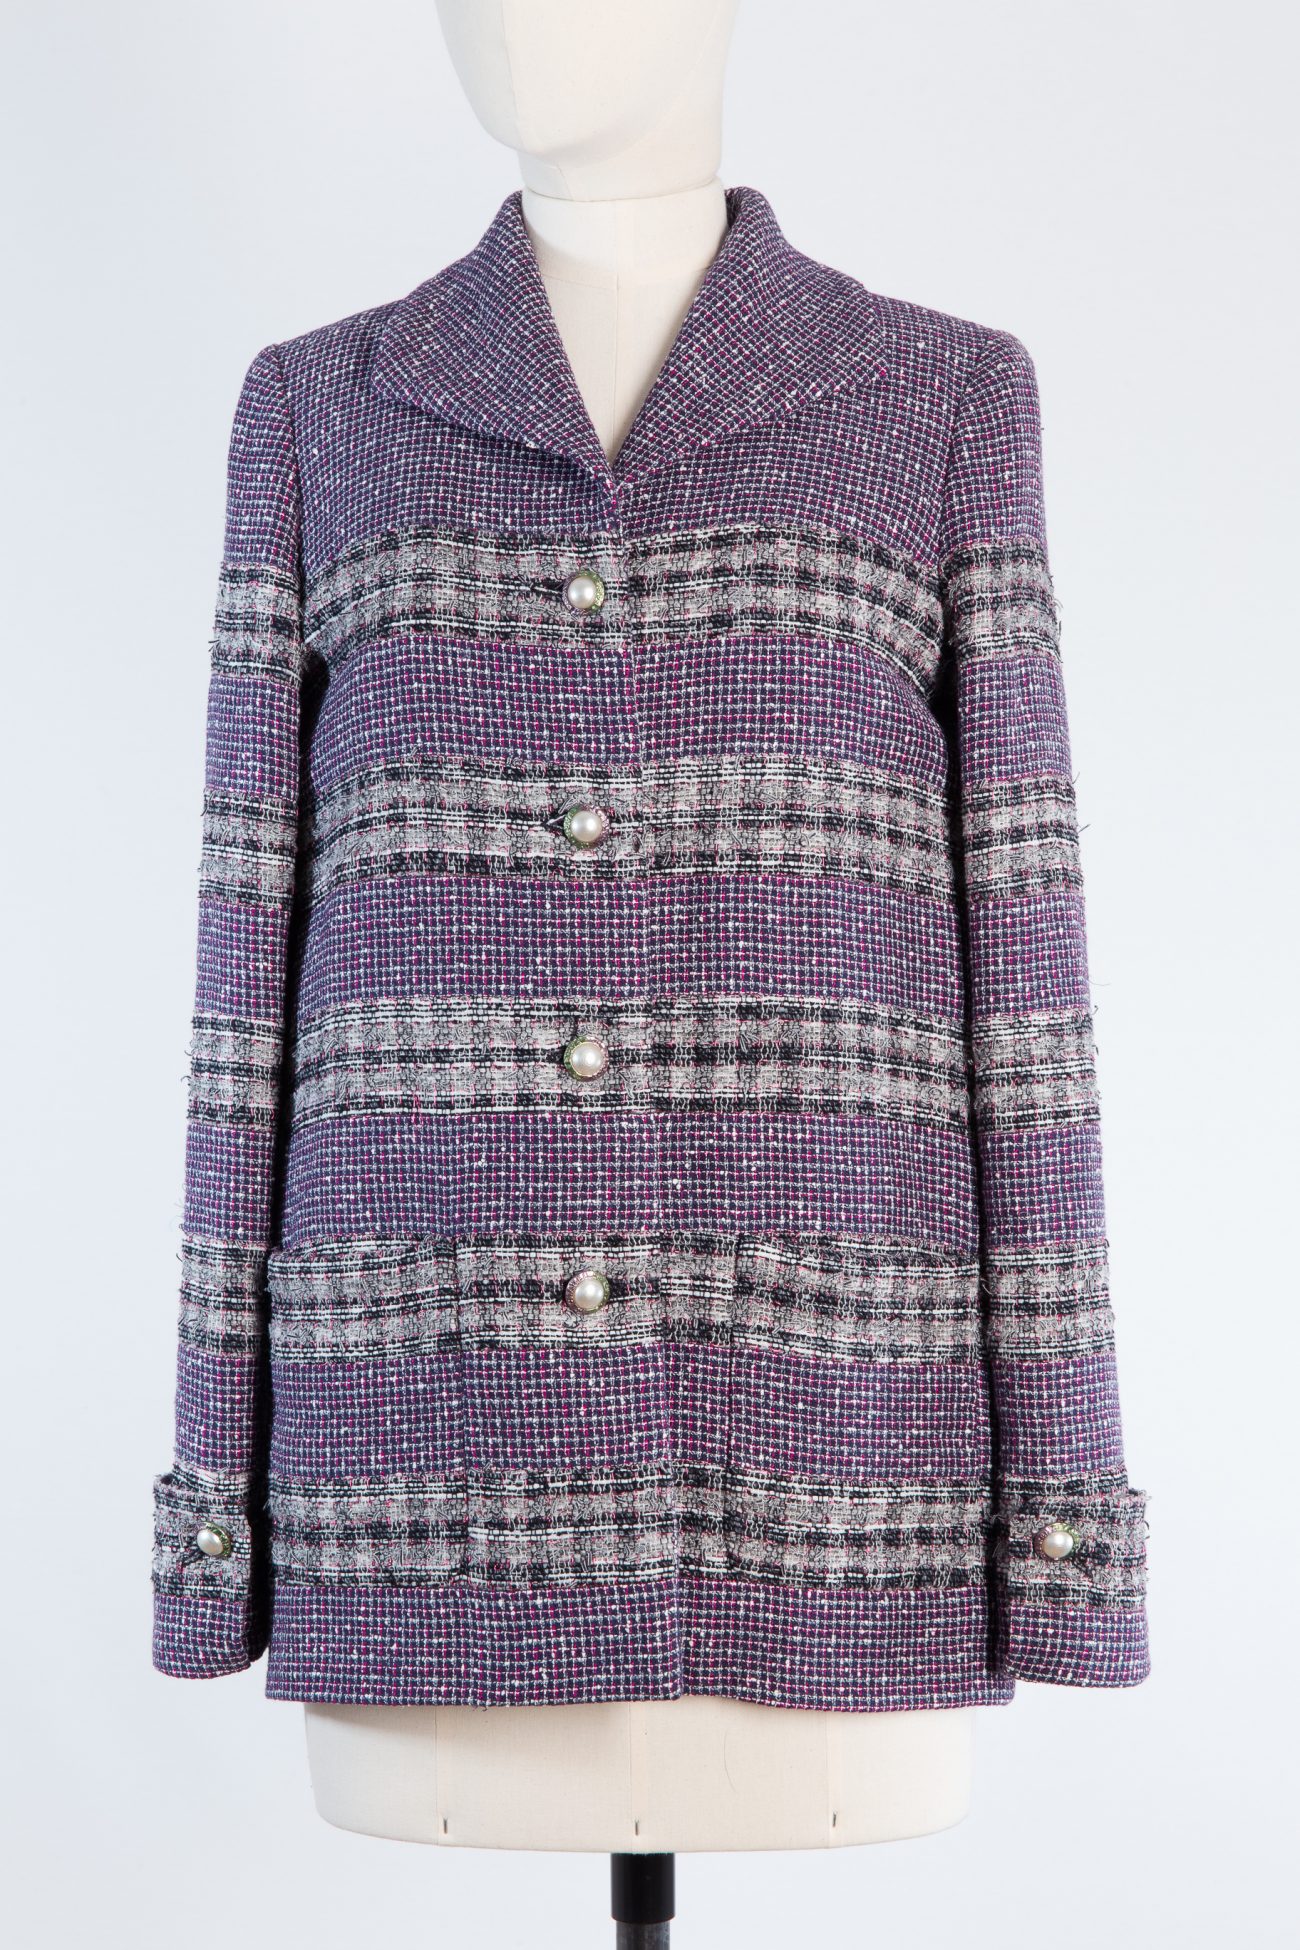 Chanel - Authenticated Jacket - Tweed Multicolour Abstract for Women, Very Good Condition